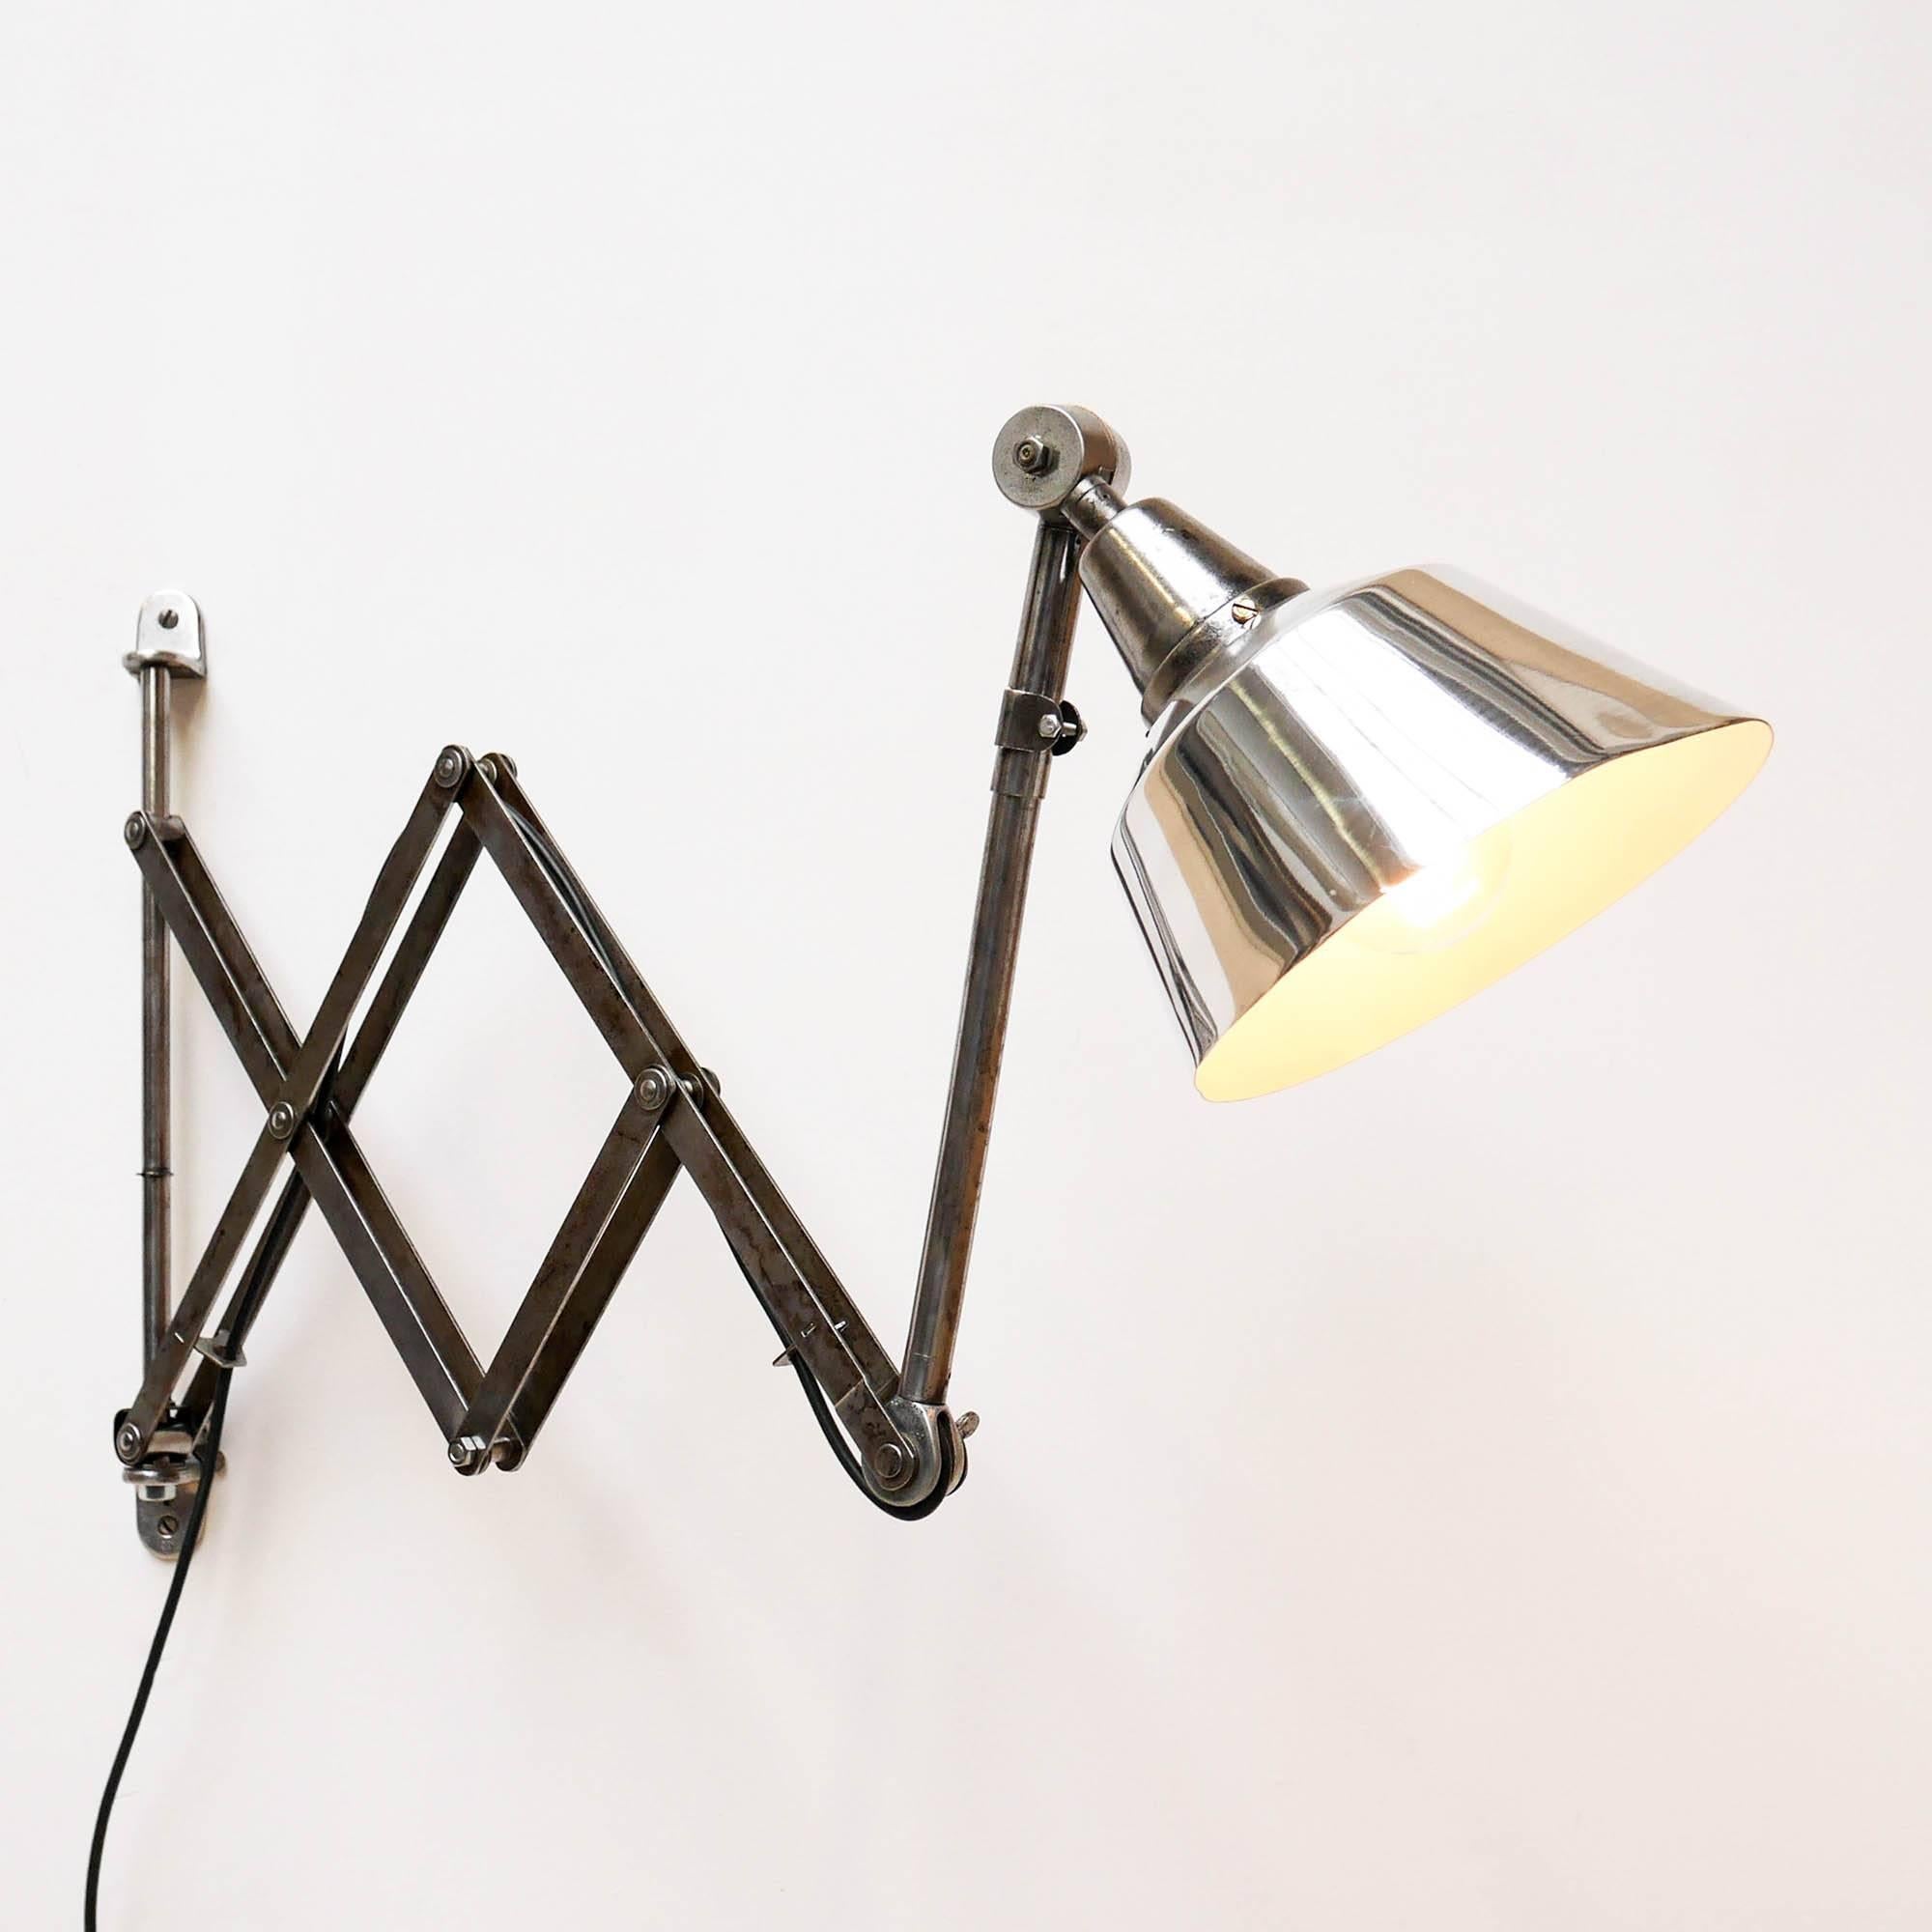 Old extensible wall light in steel, high quality manufacture. Nice patina on the scissor mechanism and the baseplate. Made by the brand “Midgard”, who provided Bauhaus de Dessau’s workplaces, Midgard lamps were also found in Bahaus’s masters and